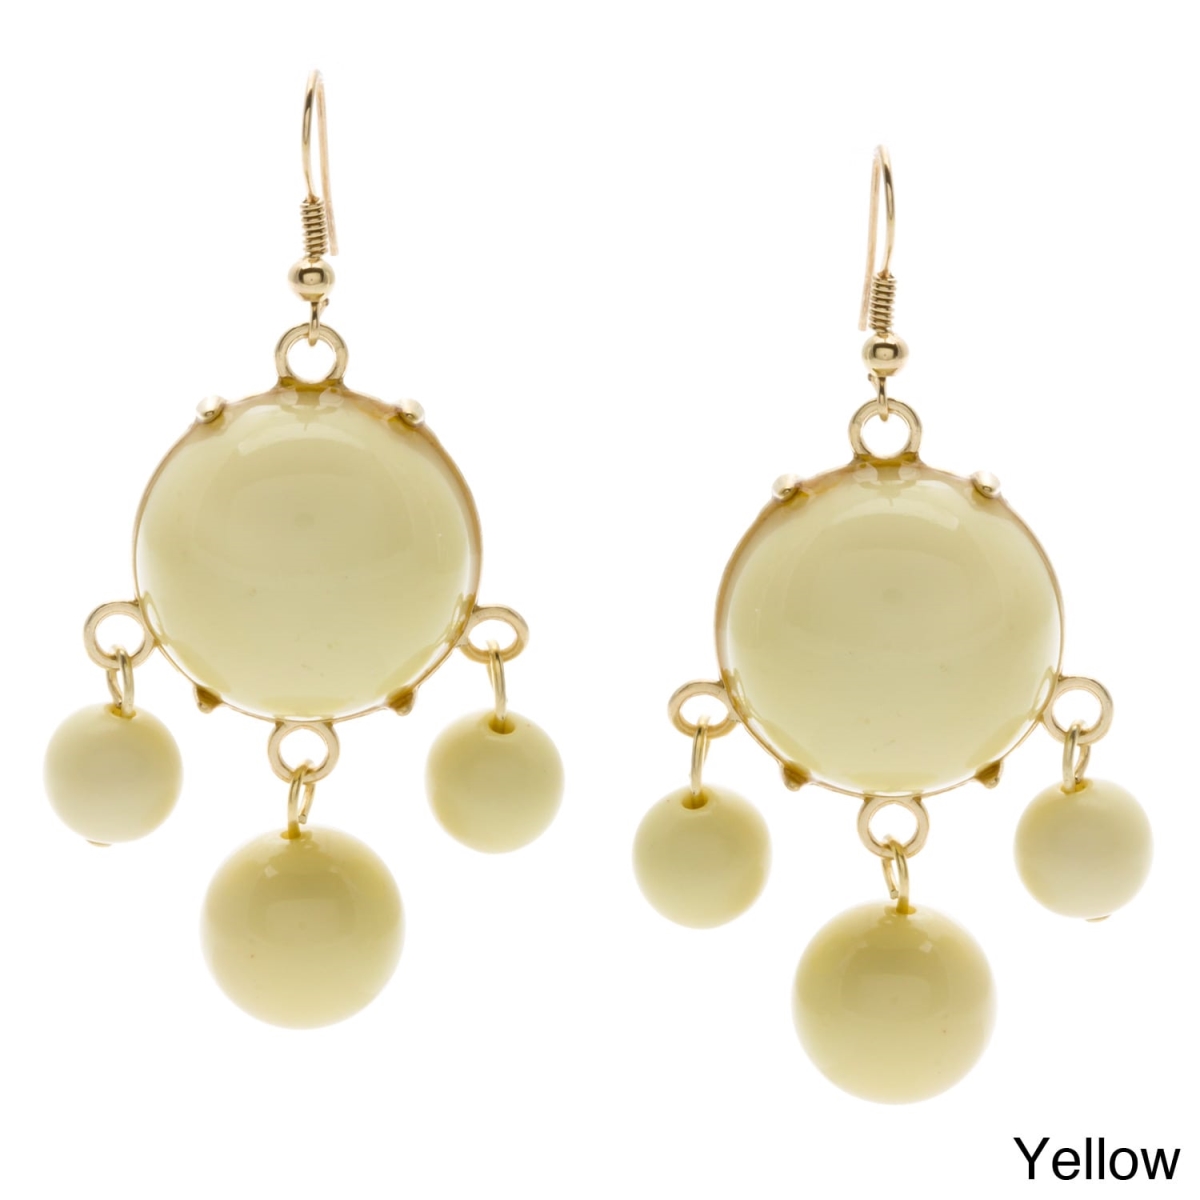 Picture of Alexa Starr J9971/EP/YELL Goldtone Colored Lucite Bubble Earrings